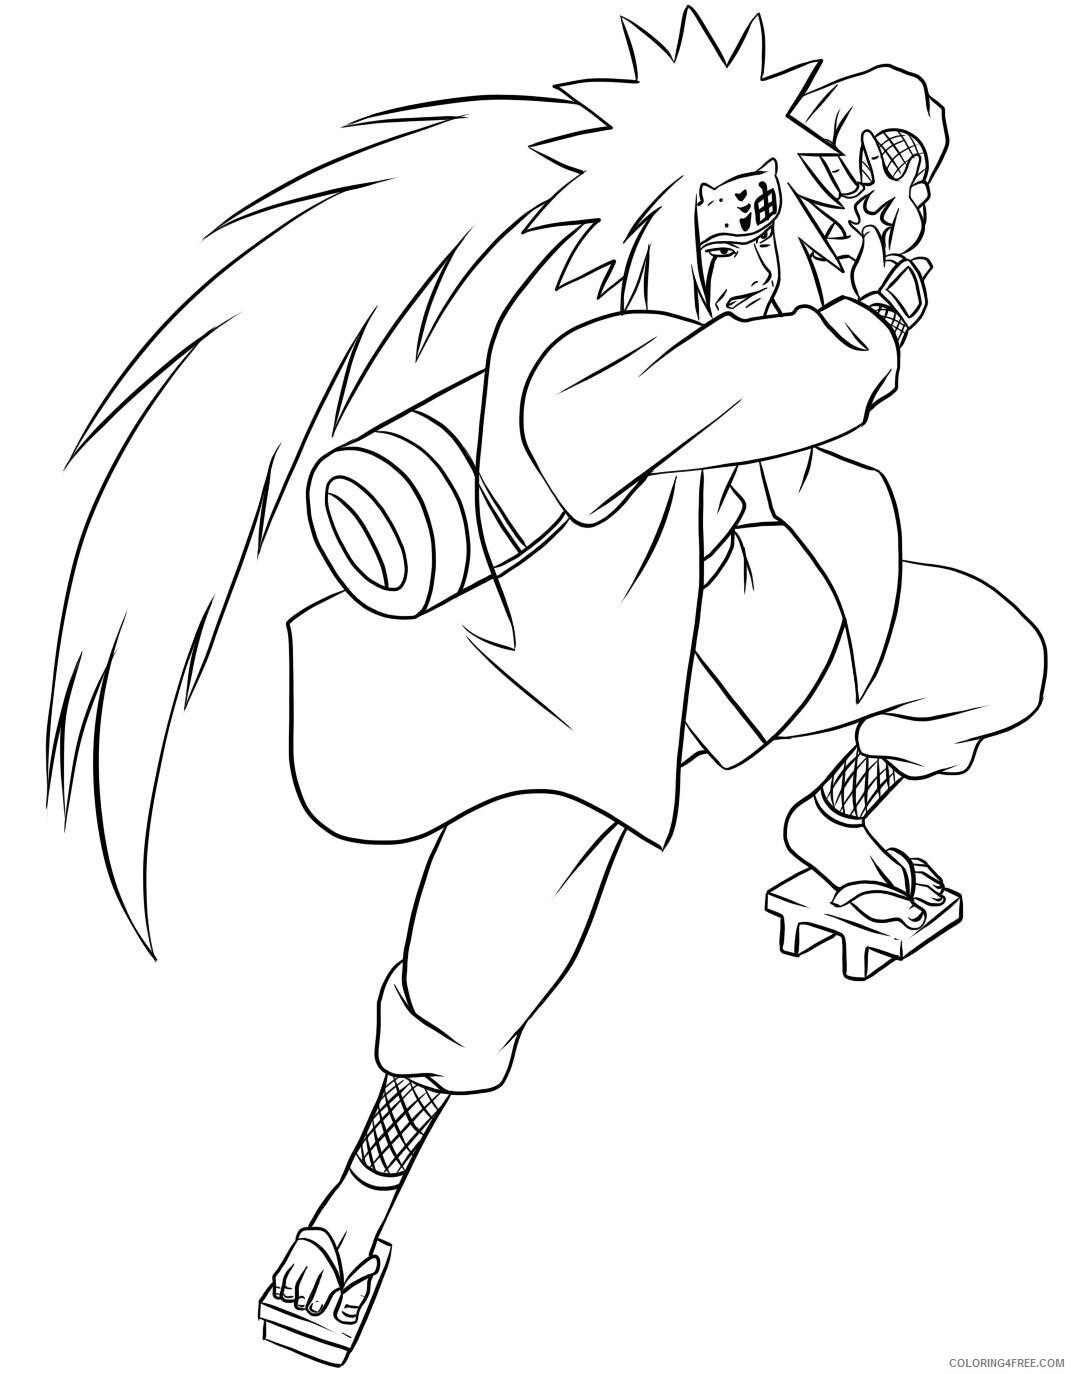 Naruto Printable Coloring Pages Anime Naruto Pictures 2021 0912 Coloring4free